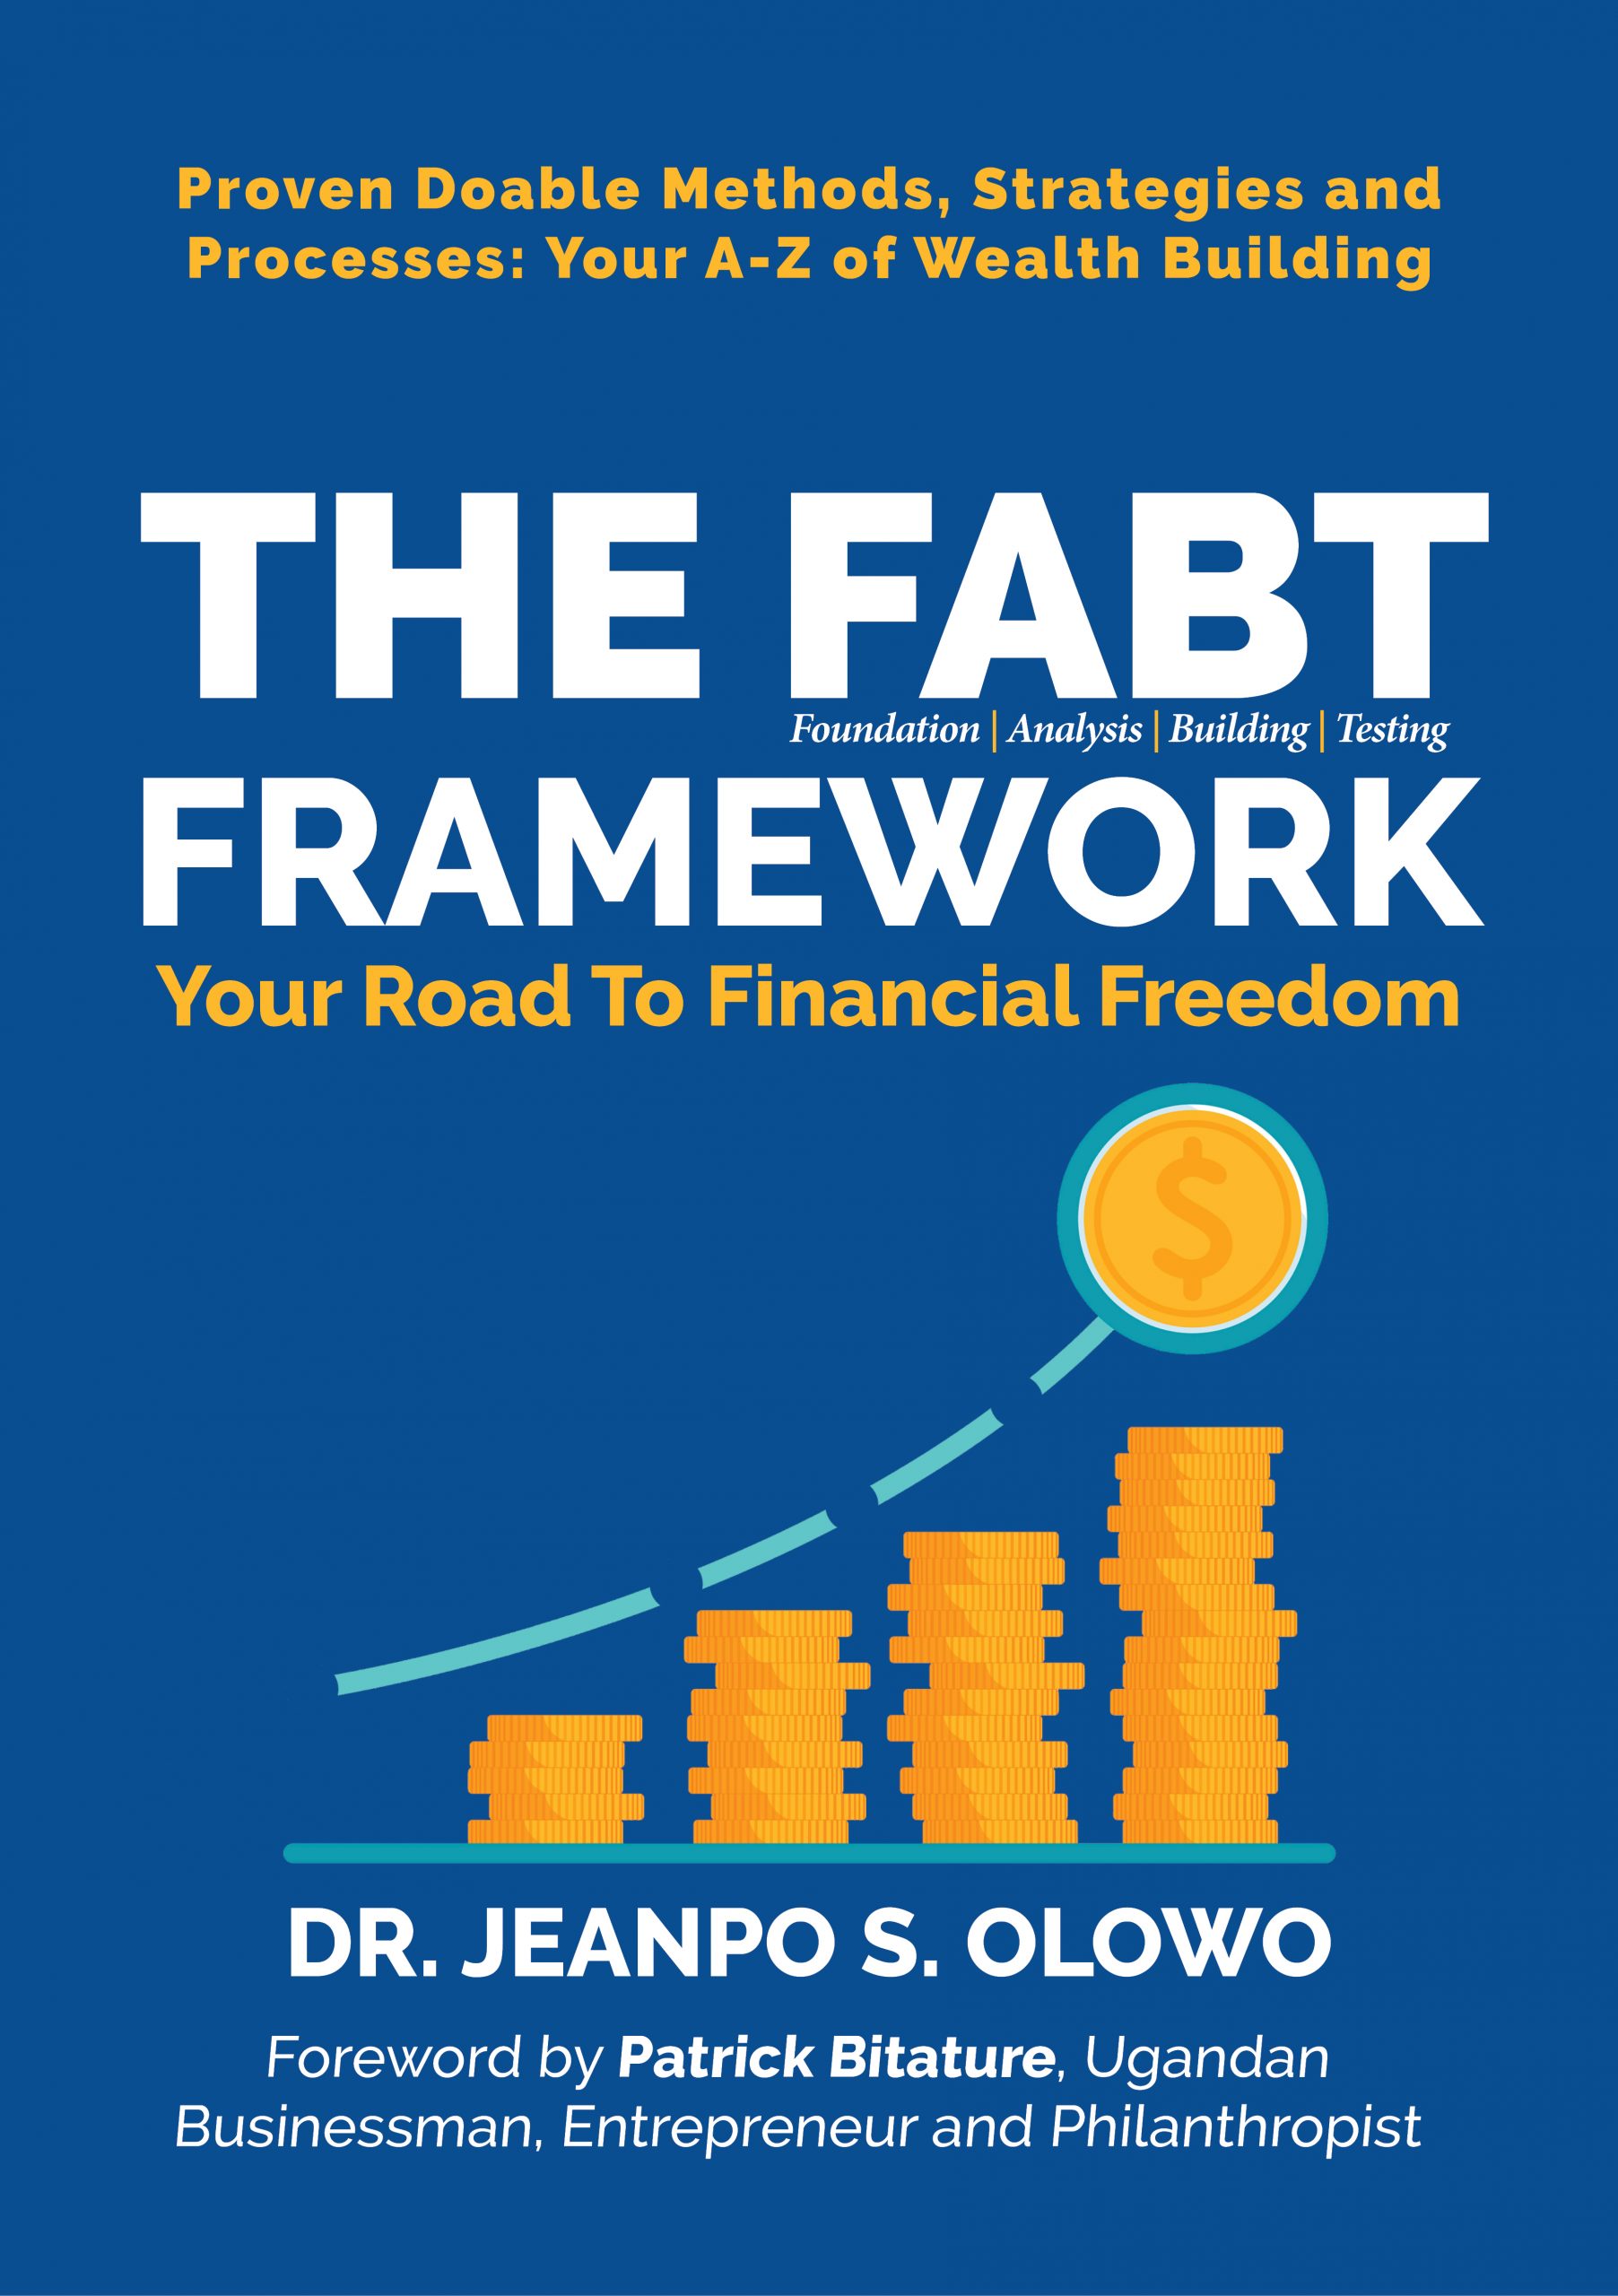 The FABT Framework - Your Road To Financial Freedom